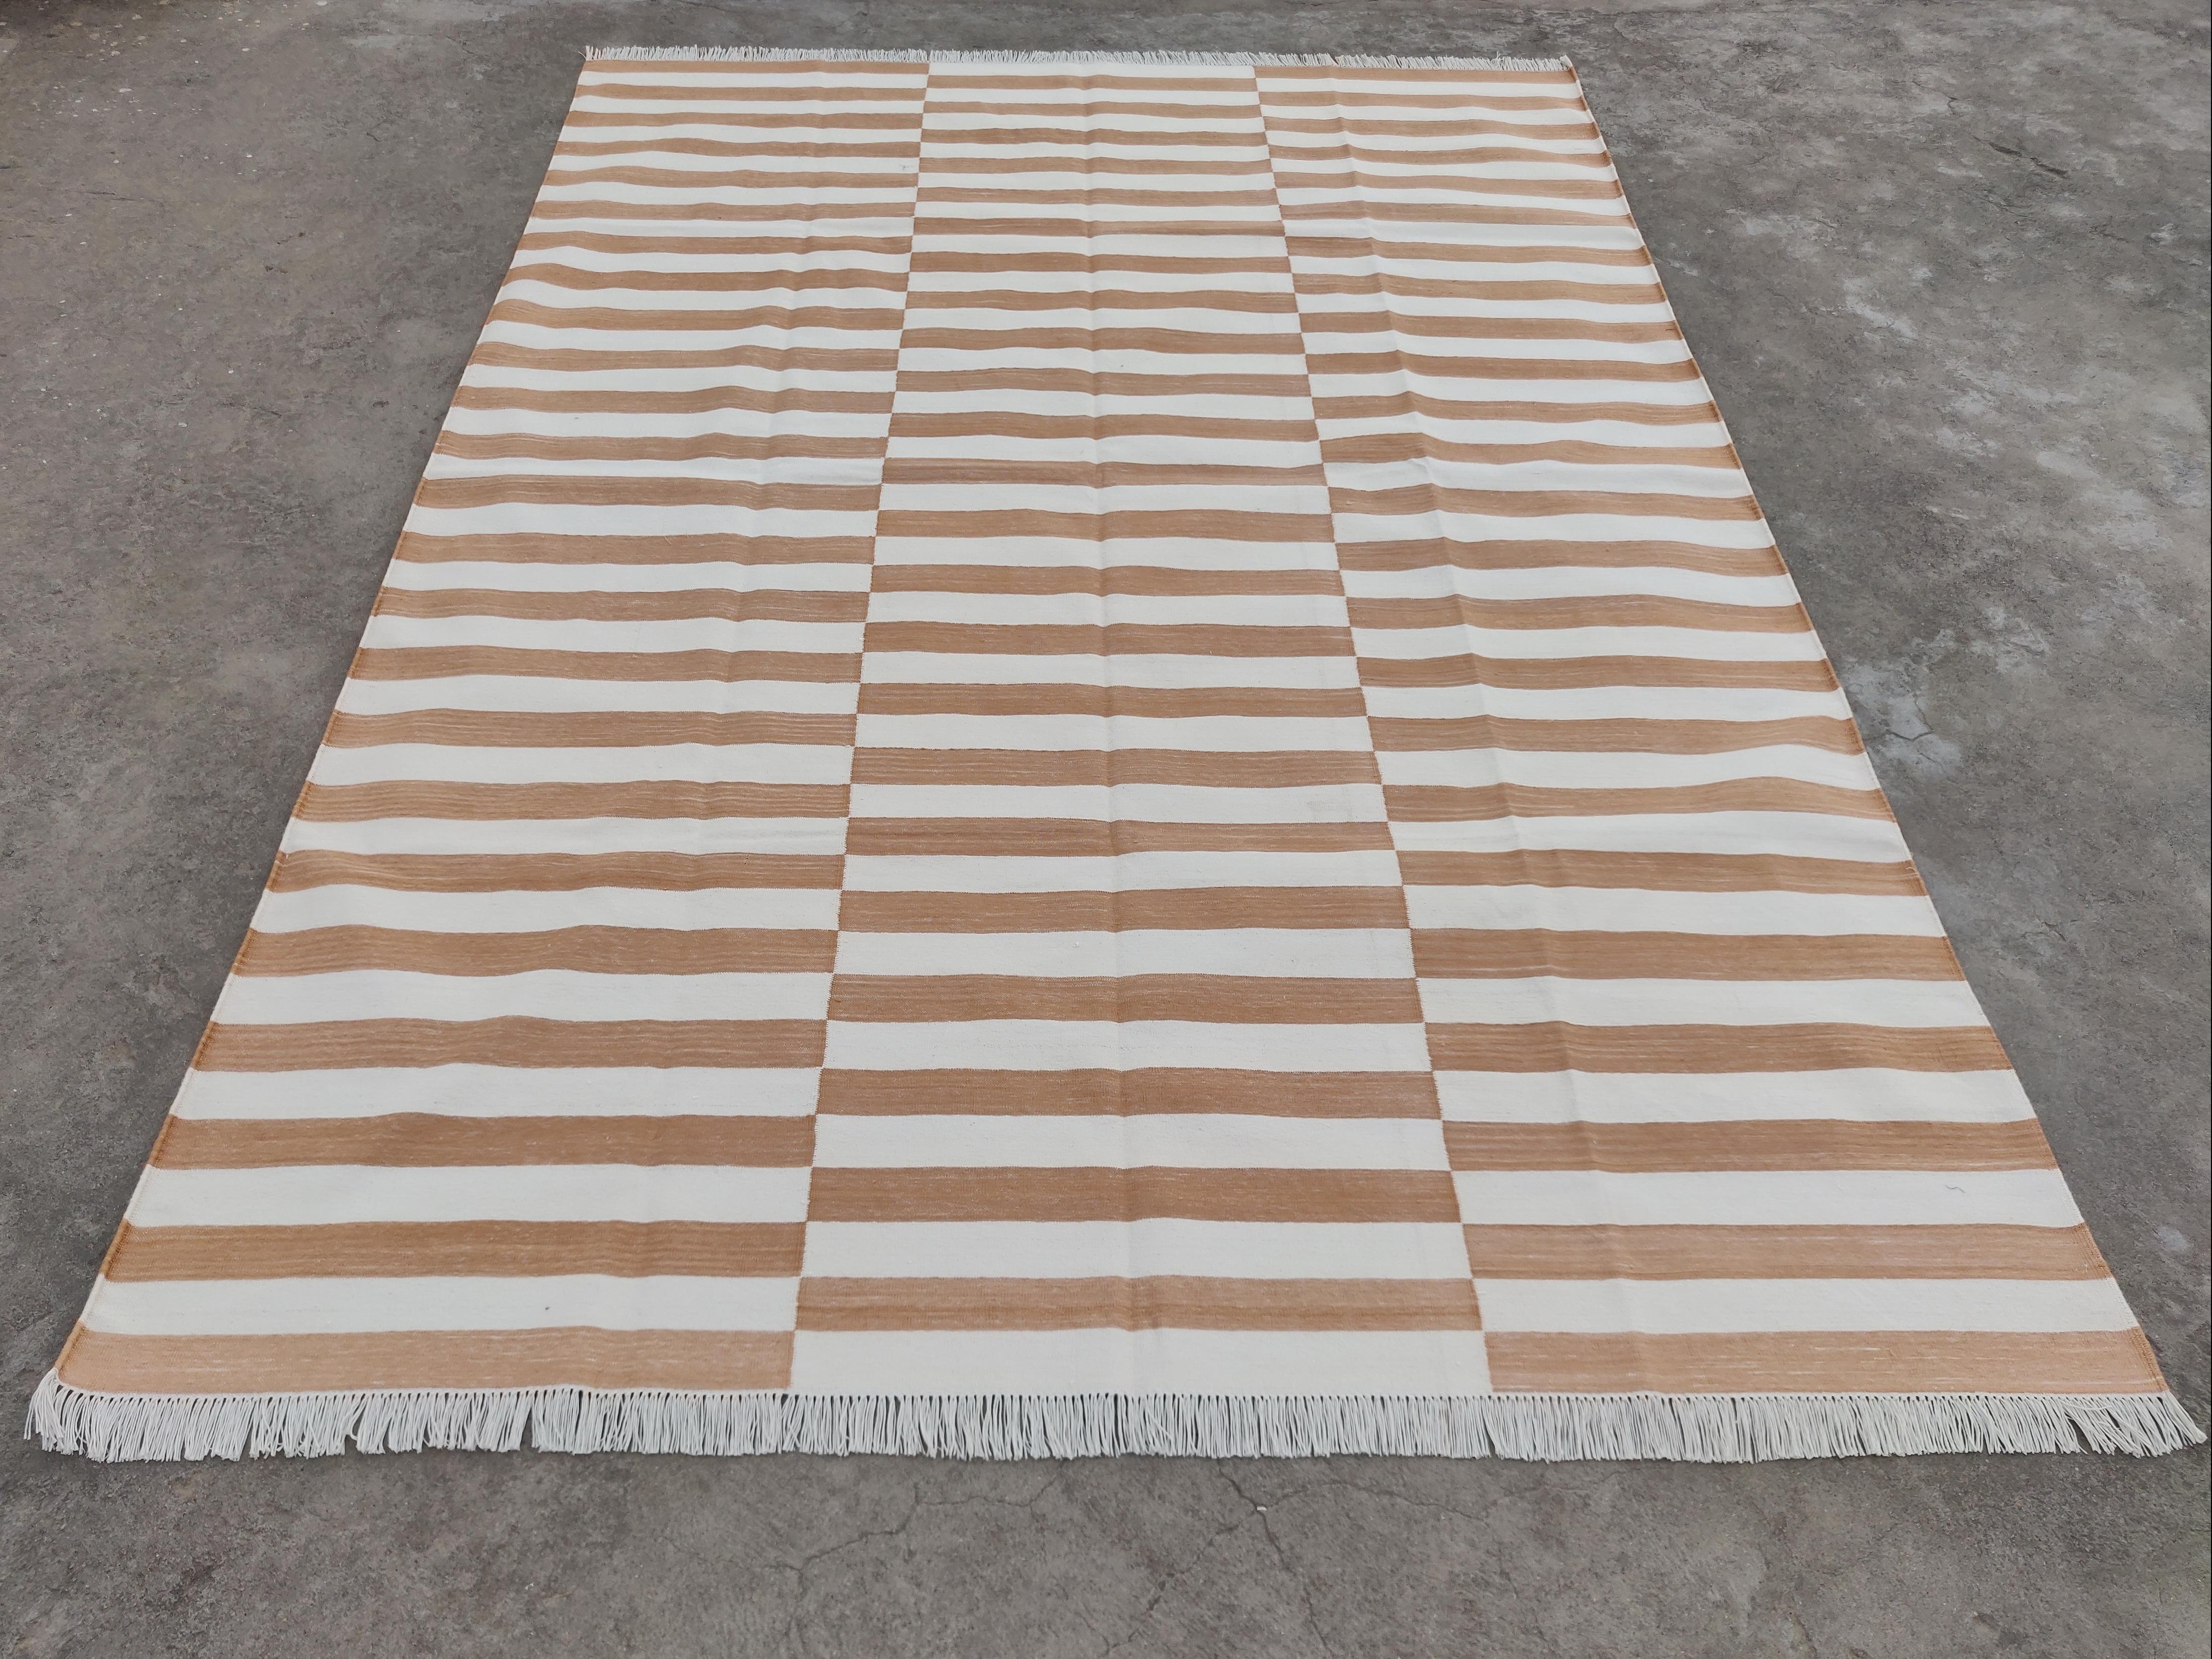 Contemporary Handmade Cotton Area Flat Weave Rug, 6x9 Tan And White Striped Indian Dhurrie For Sale